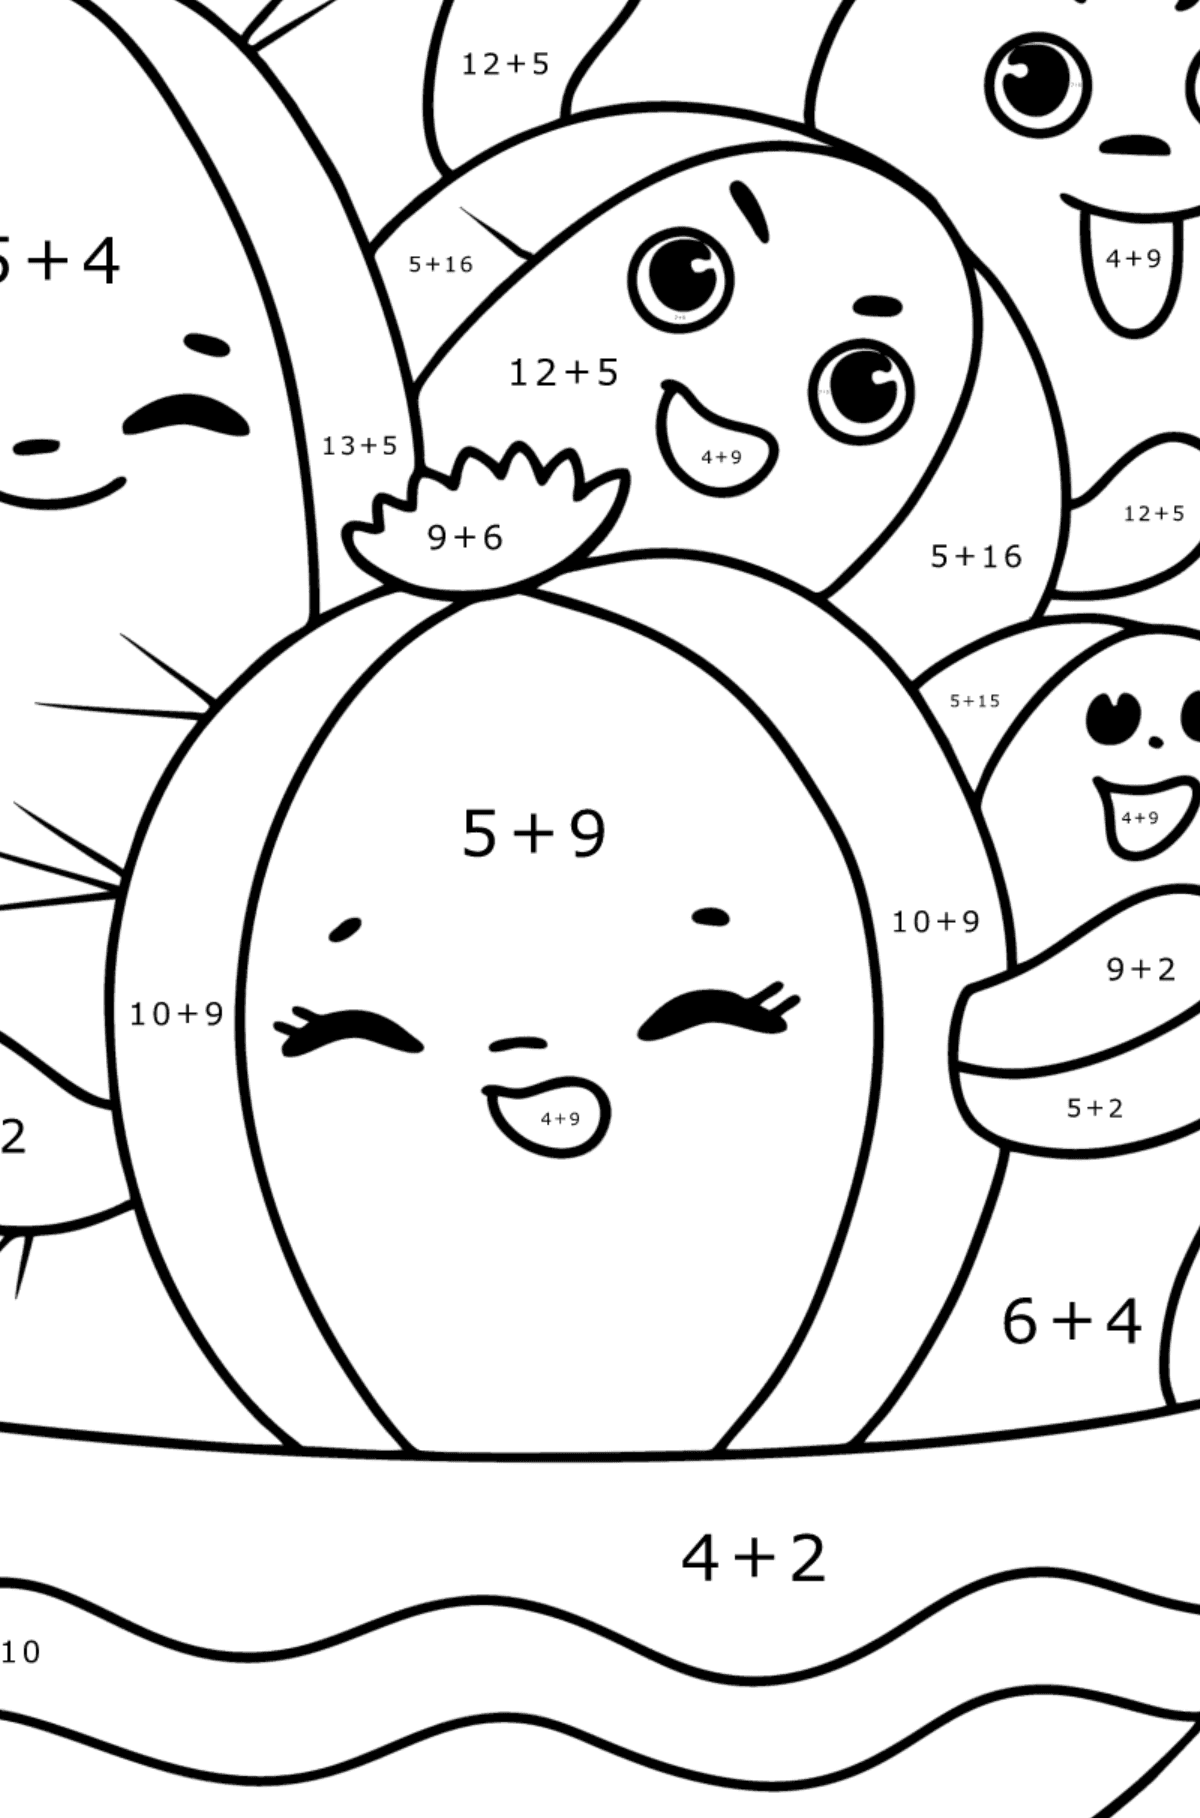 Kawaii Cactus coloring page - Math Coloring - Addition for Kids